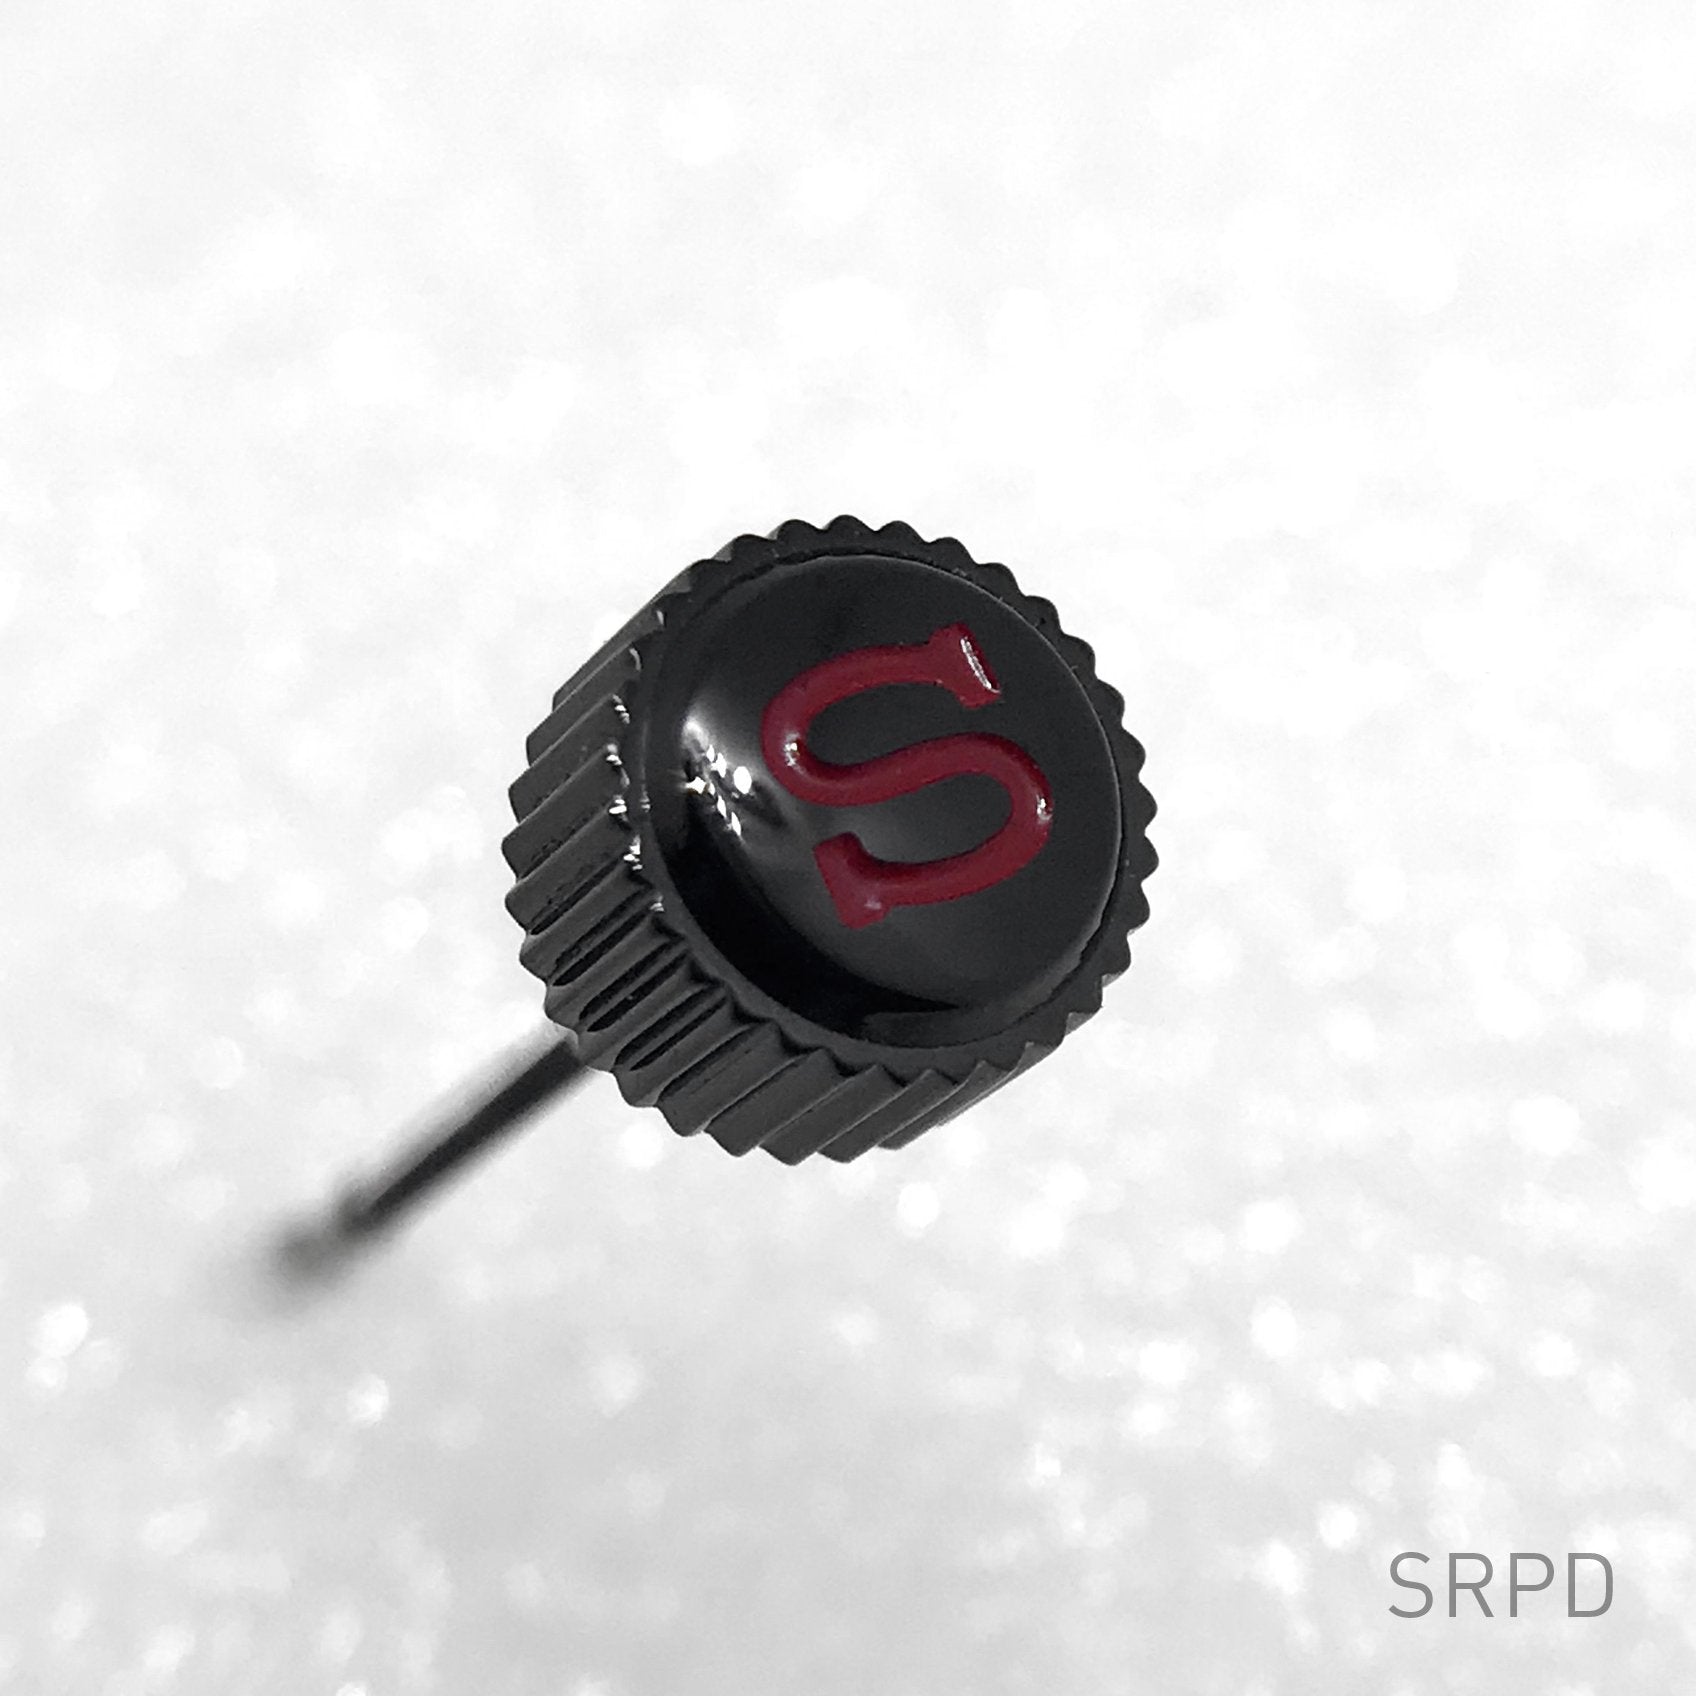 Crown - SRPD - Polished PVD Black - Red "S"